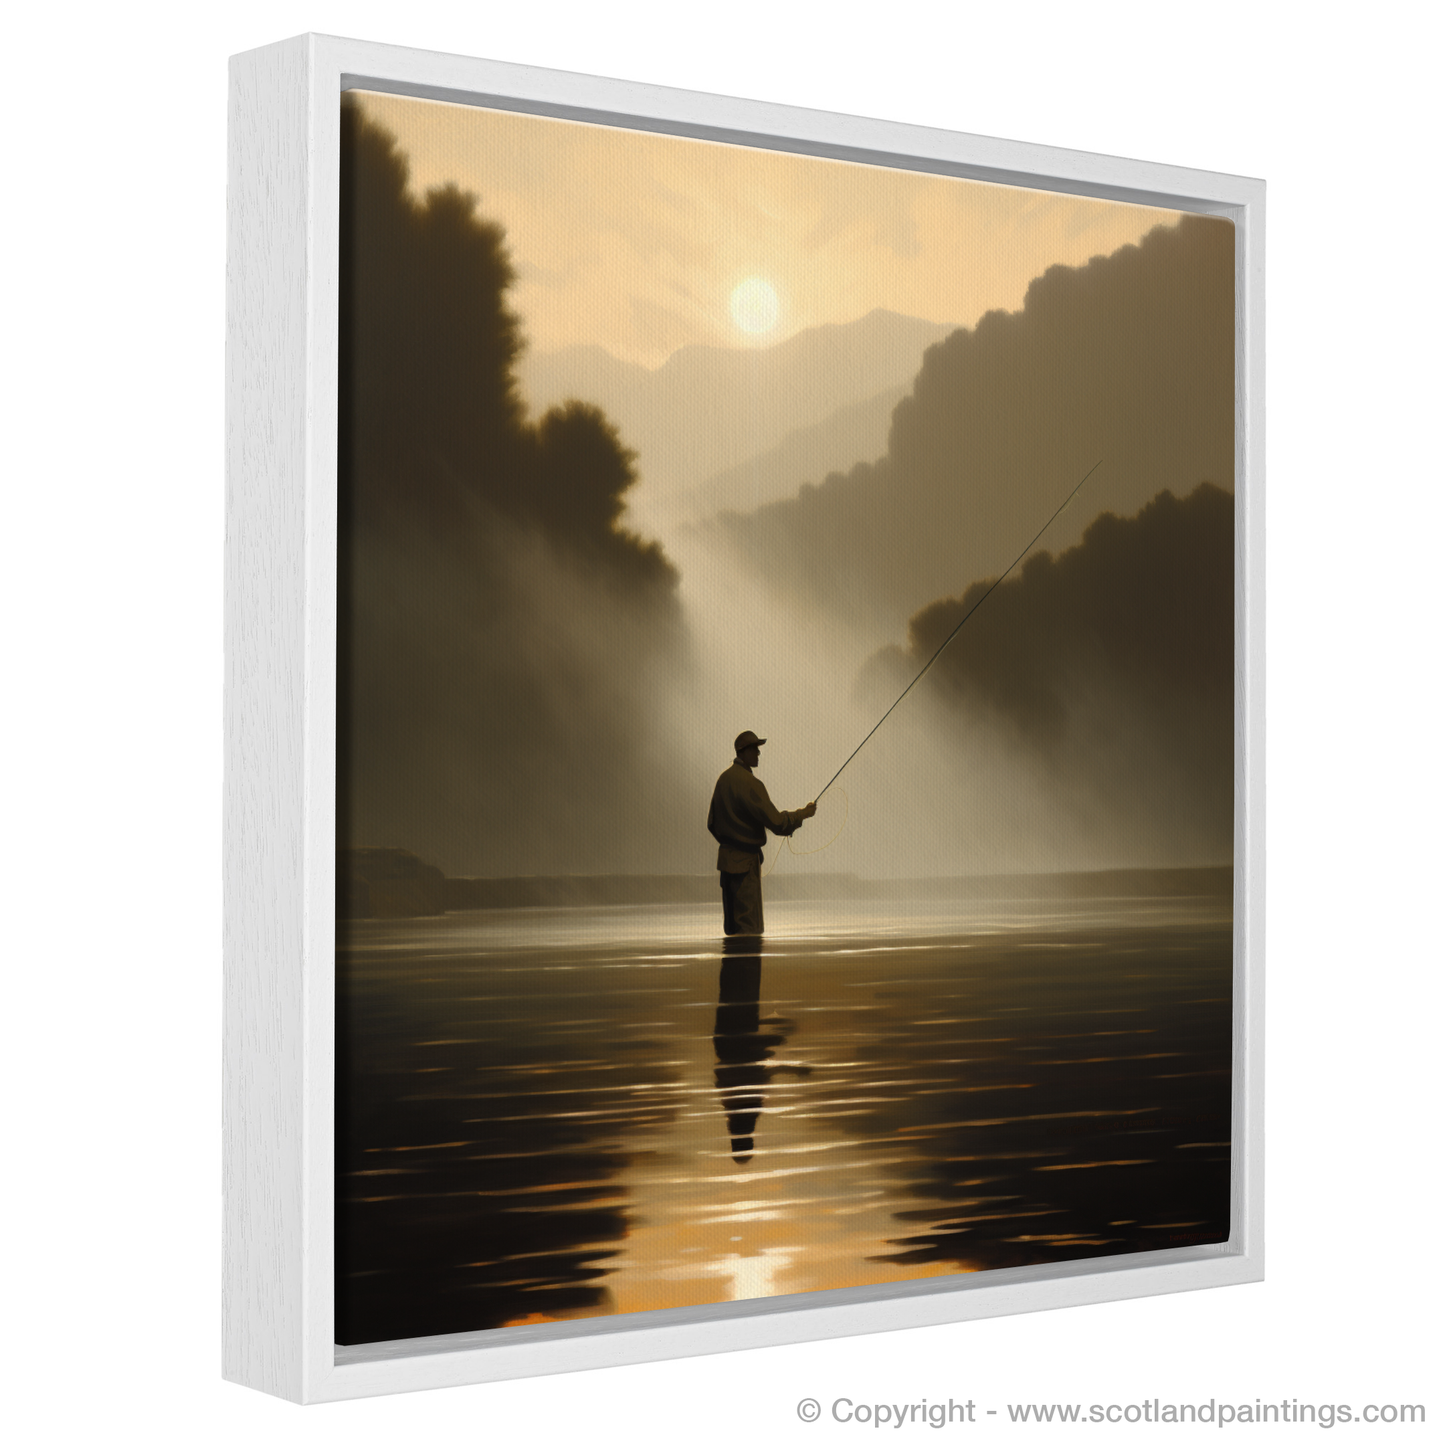 Misty Morning on the River Oykel: A Fly Fishing Reverie